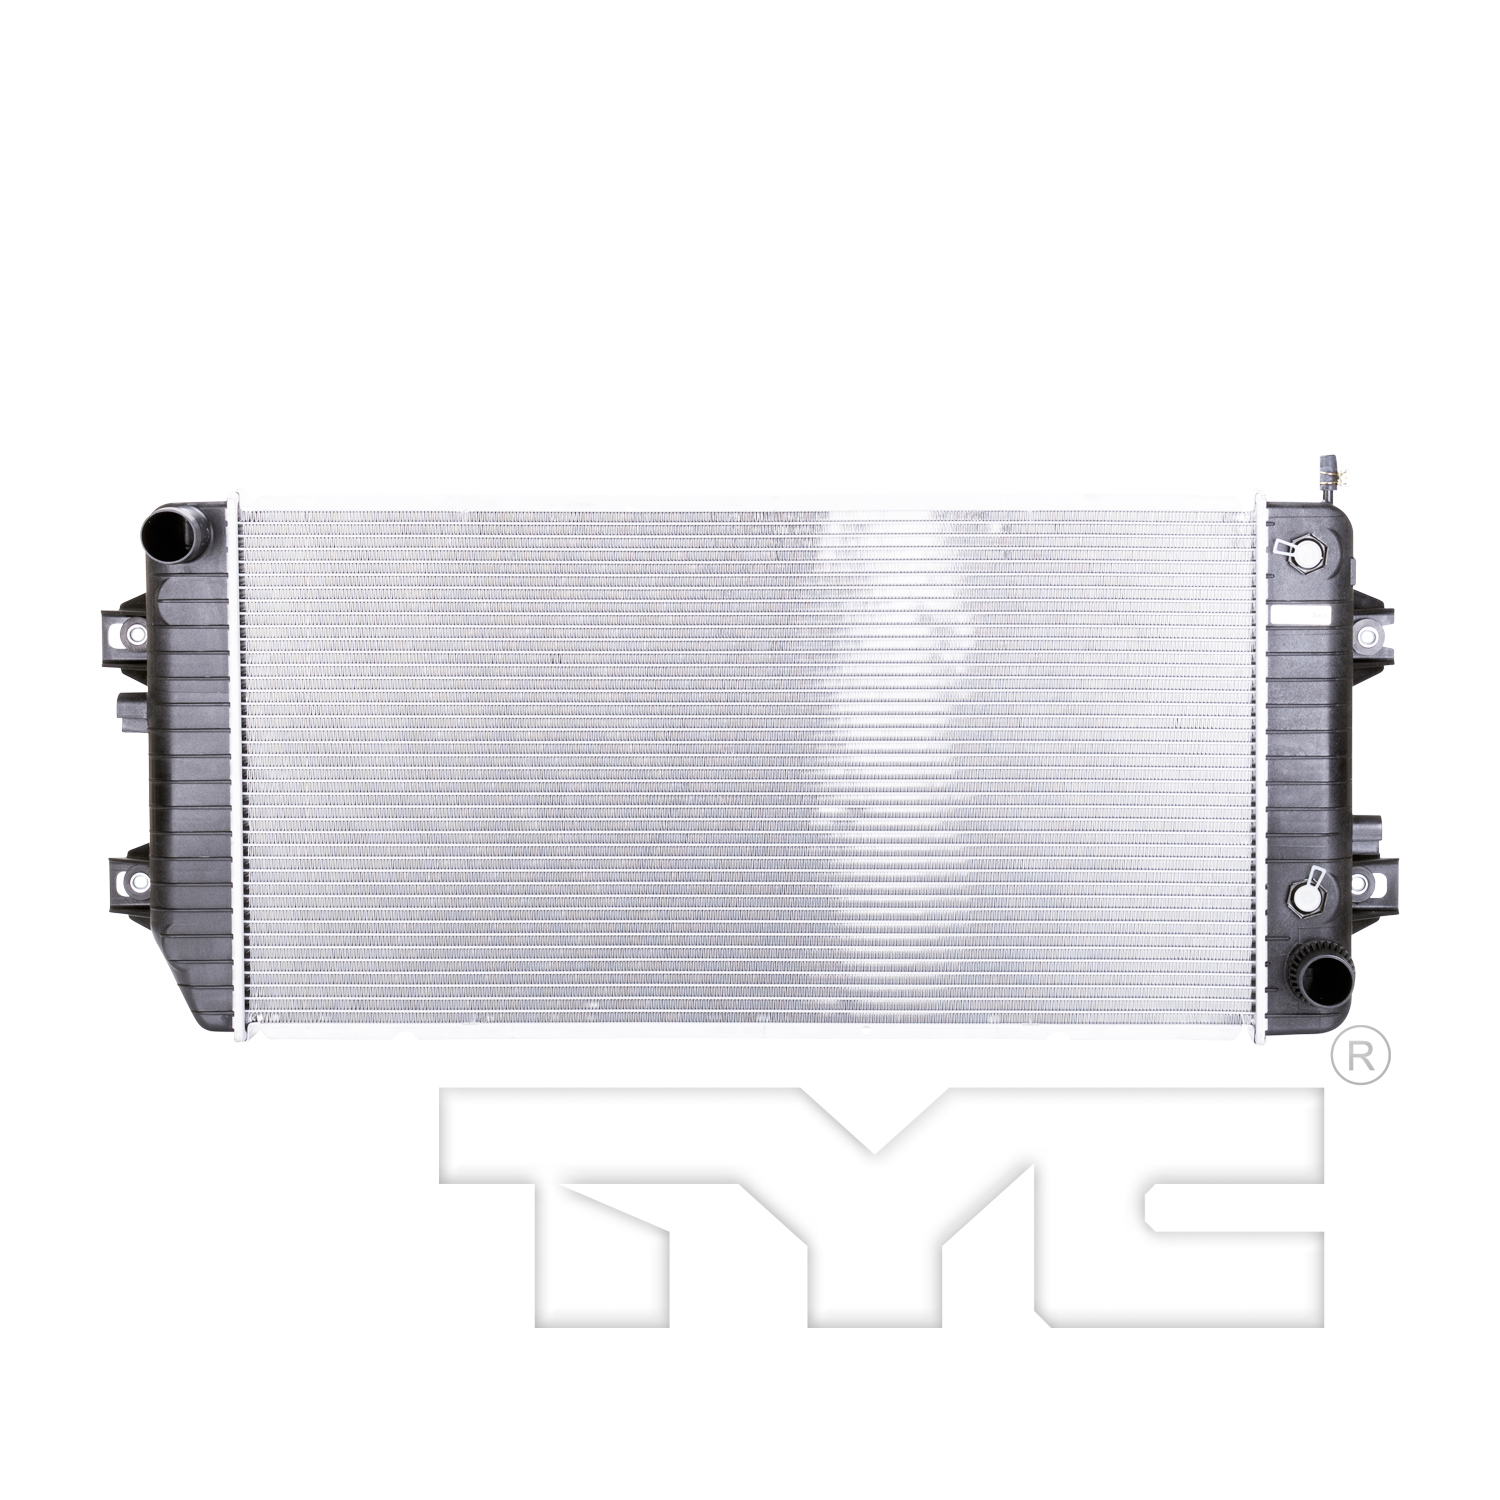 Aftermarket RADIATORS for CHEVROLET - EXPRESS 2500, EXPRESS 2500,03-23,Radiator assembly